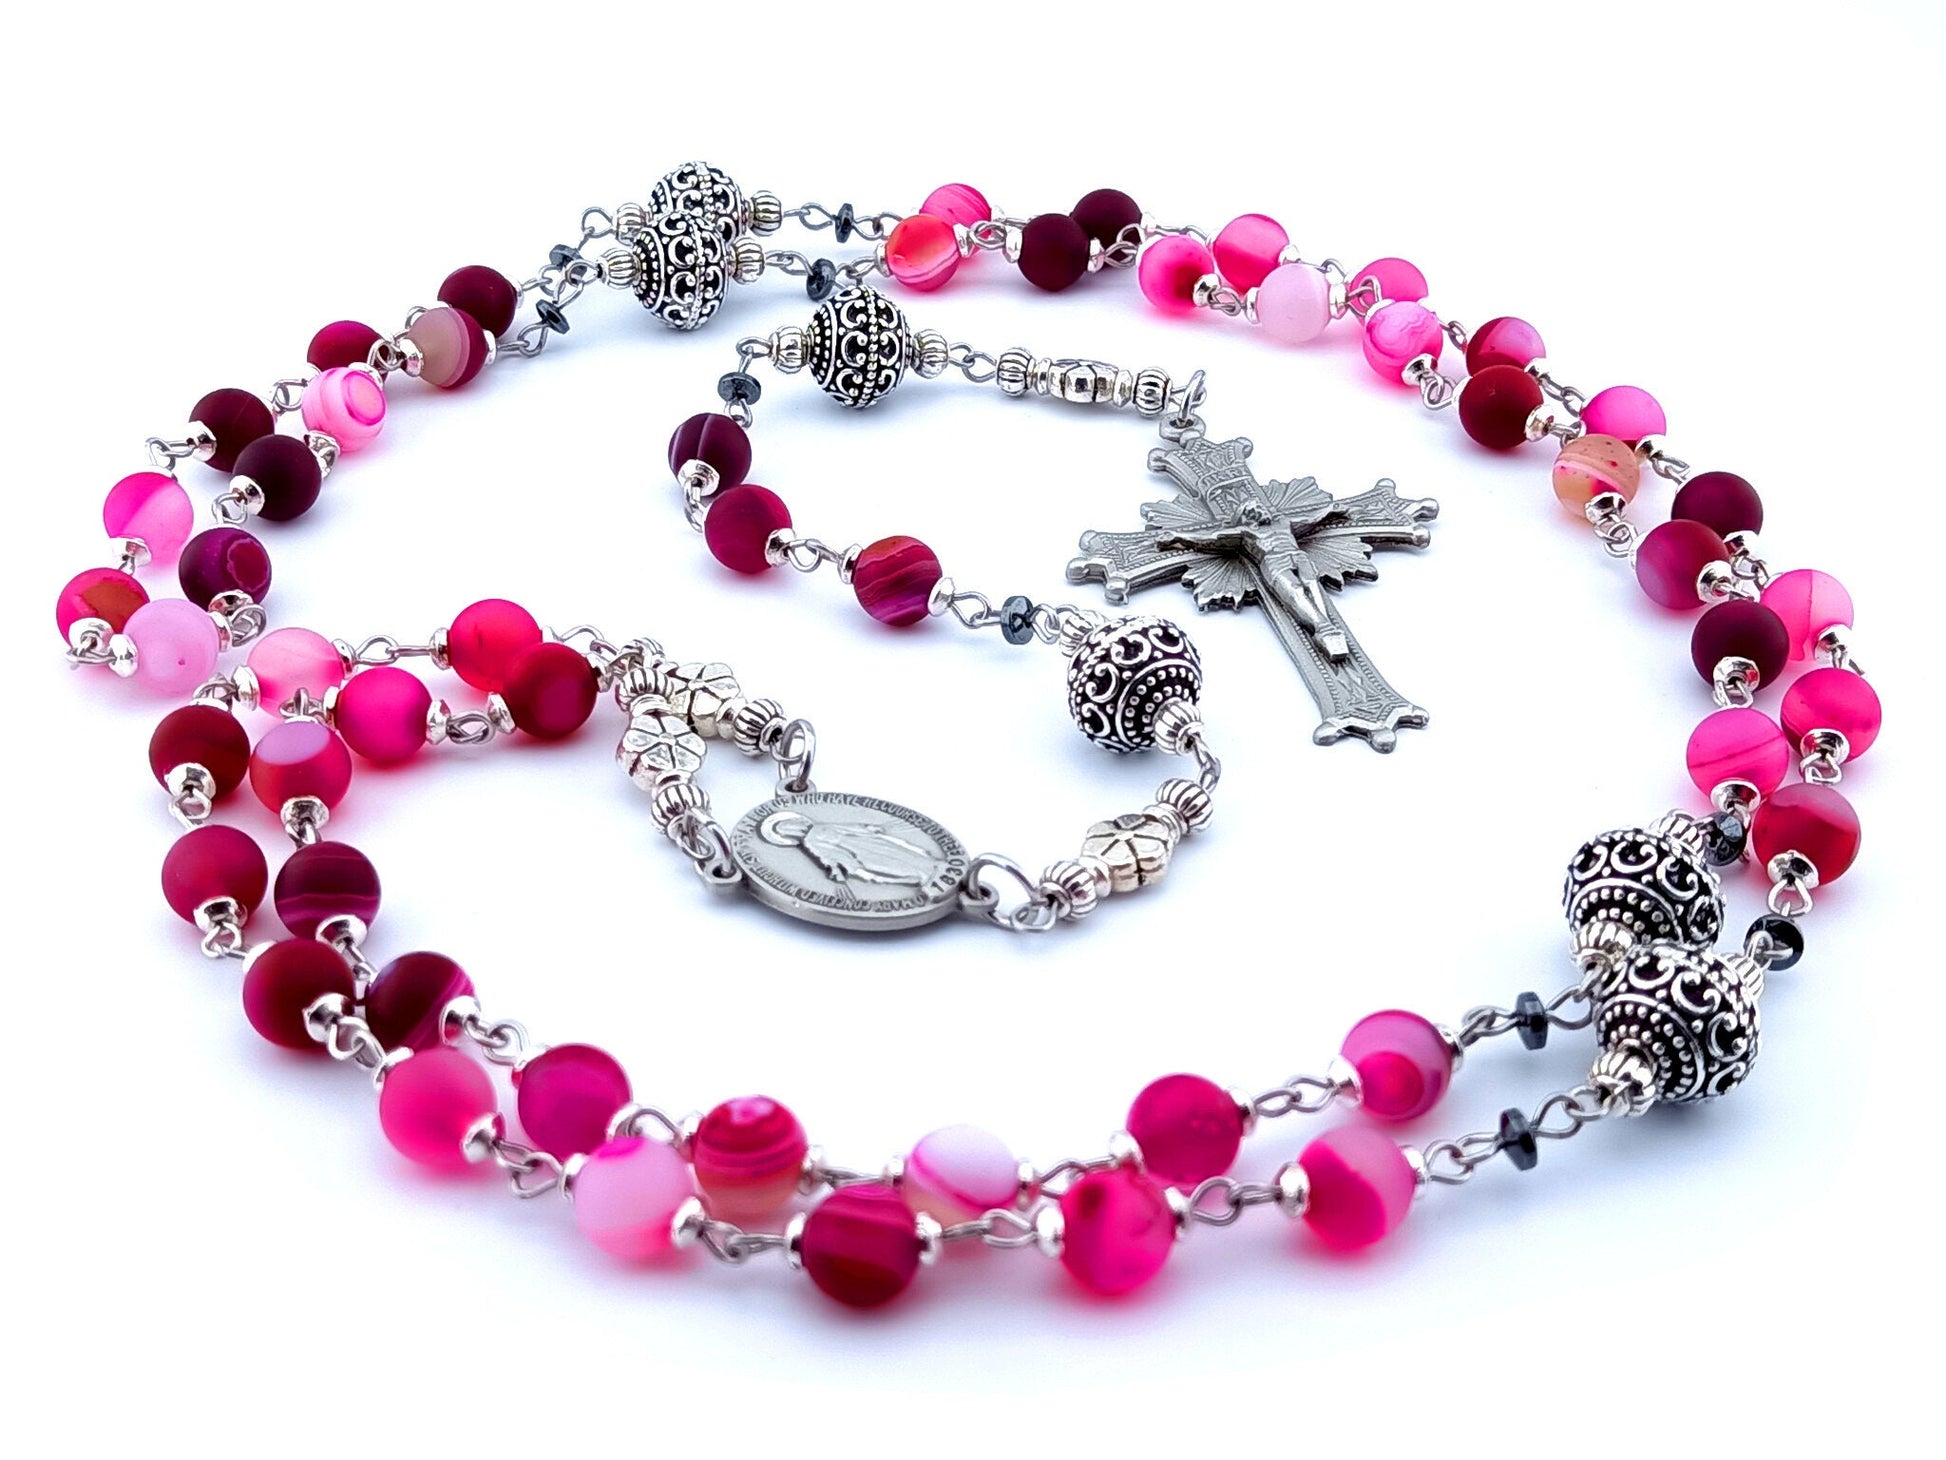 Miraculous medal unique rosary beads with purple agate gemstone beads, silver pater beads, pewter crucifix and centre medal and stainless steel wire.